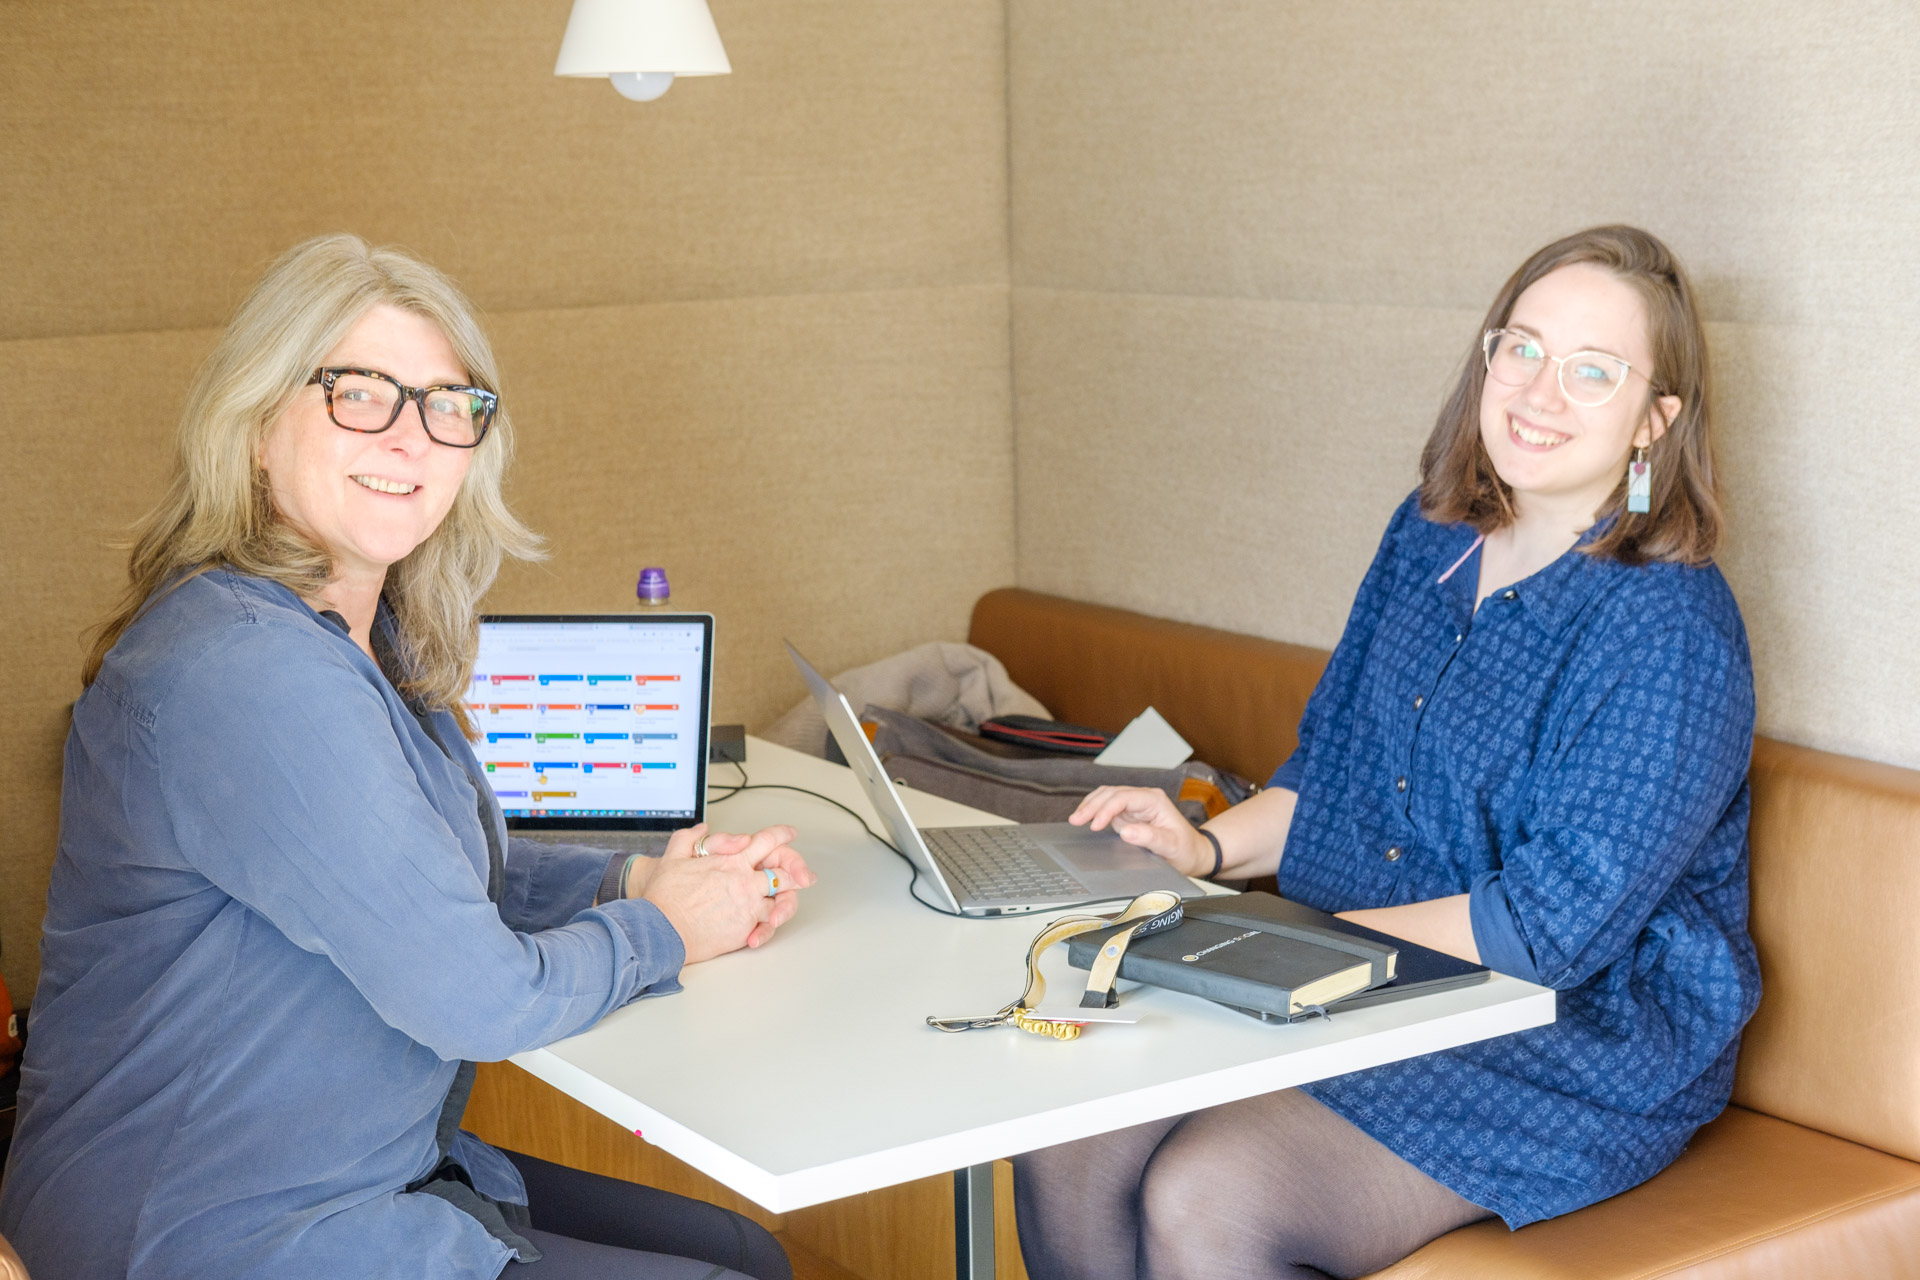 an imge of a woman in a blue top and a person in a blue dress sitting in a both, on either side of a desk. they have laptops open on the table and are smiling at the camera